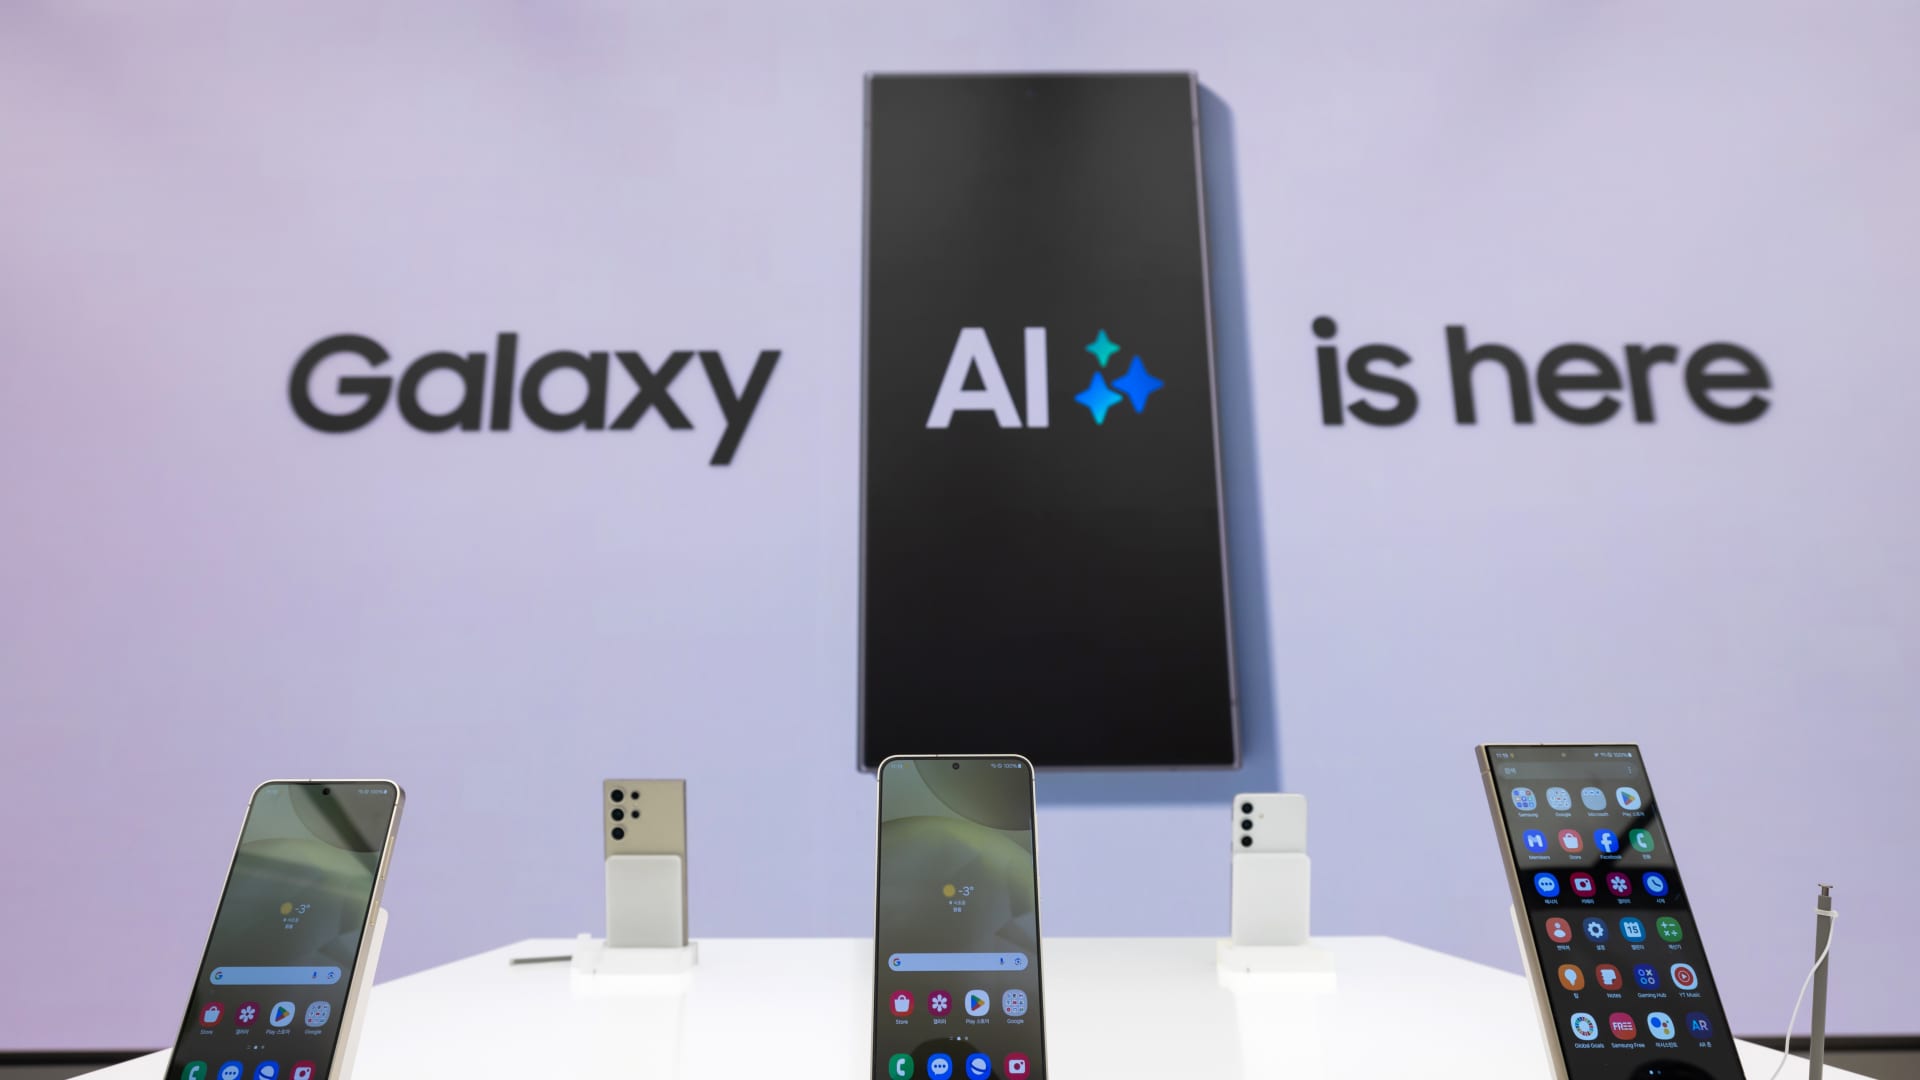 Samsung says it needs to 'redefine' its voice assistant Bixby with generative AI upgrade